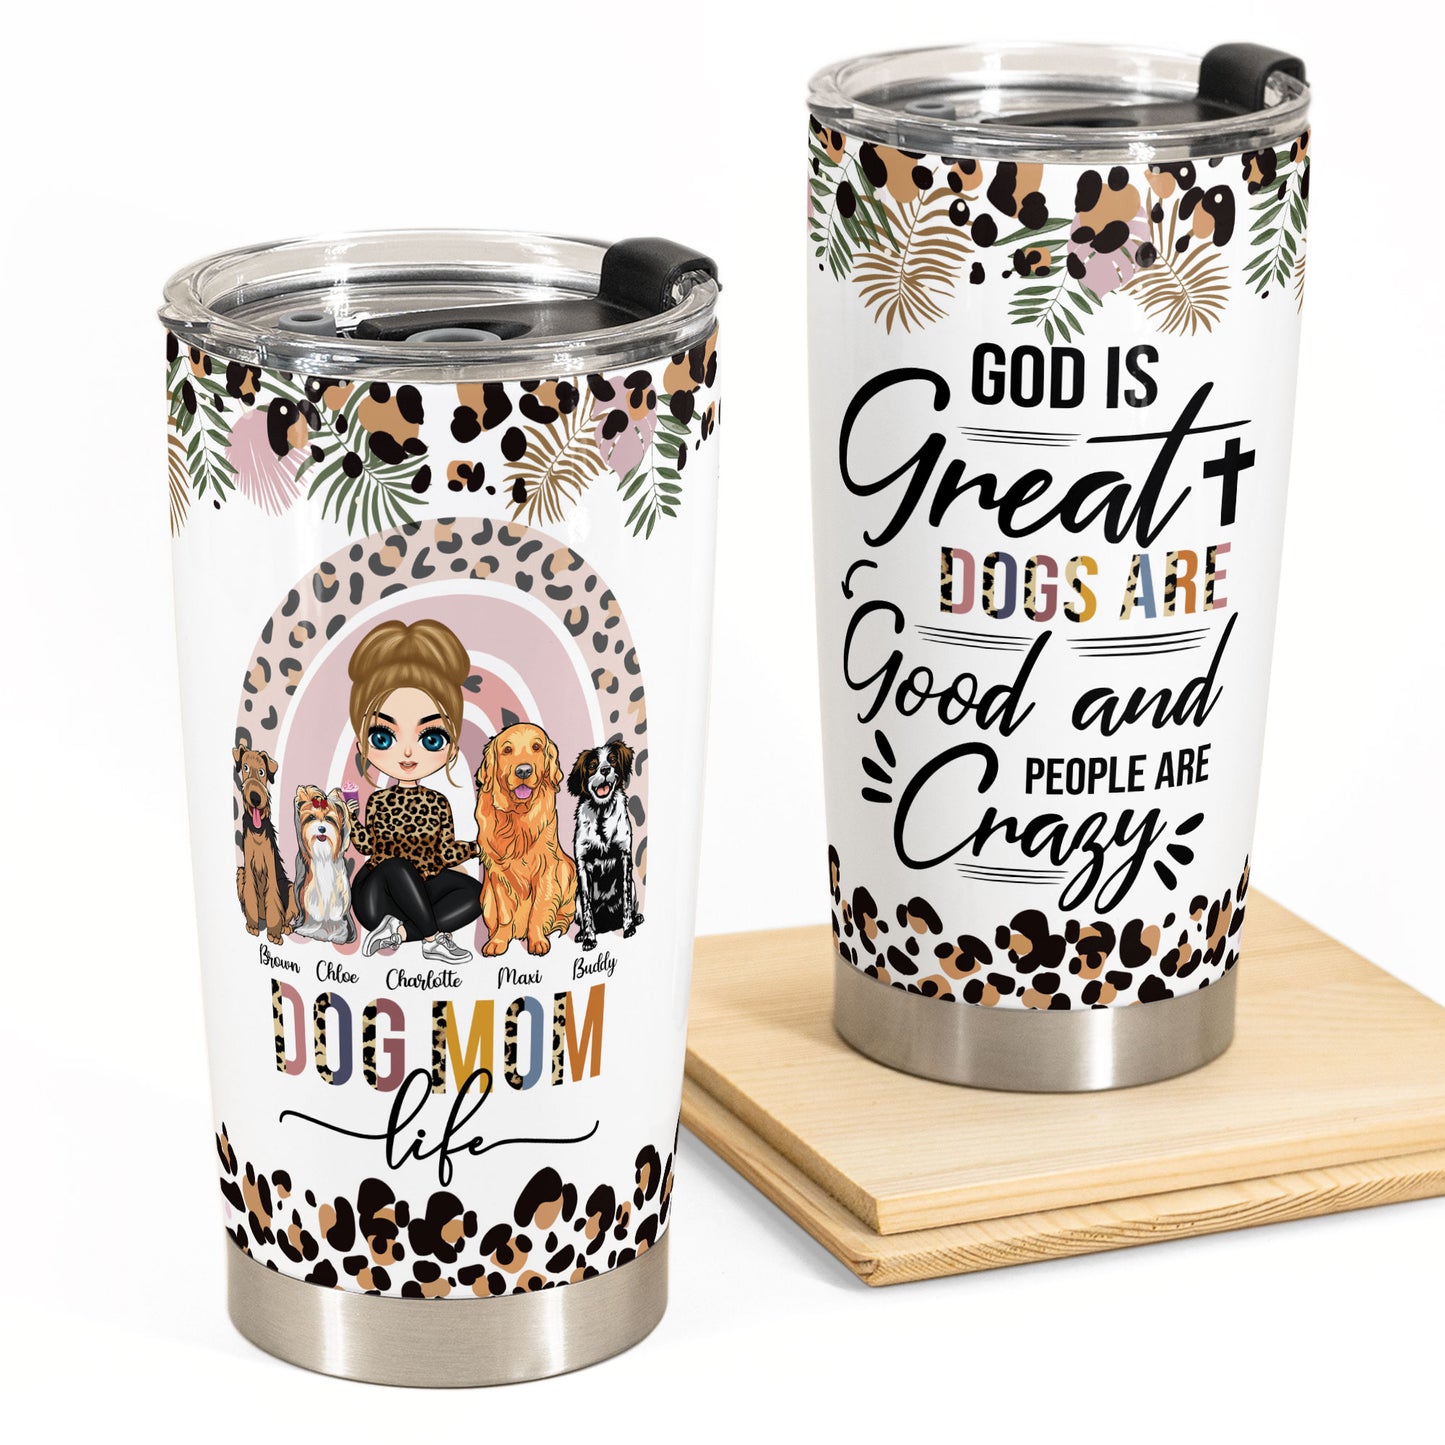 God Is Great Dogs Are Good - Personalized Tumbler Cup - Birthday Gift For Dog Mom, Dog Lover